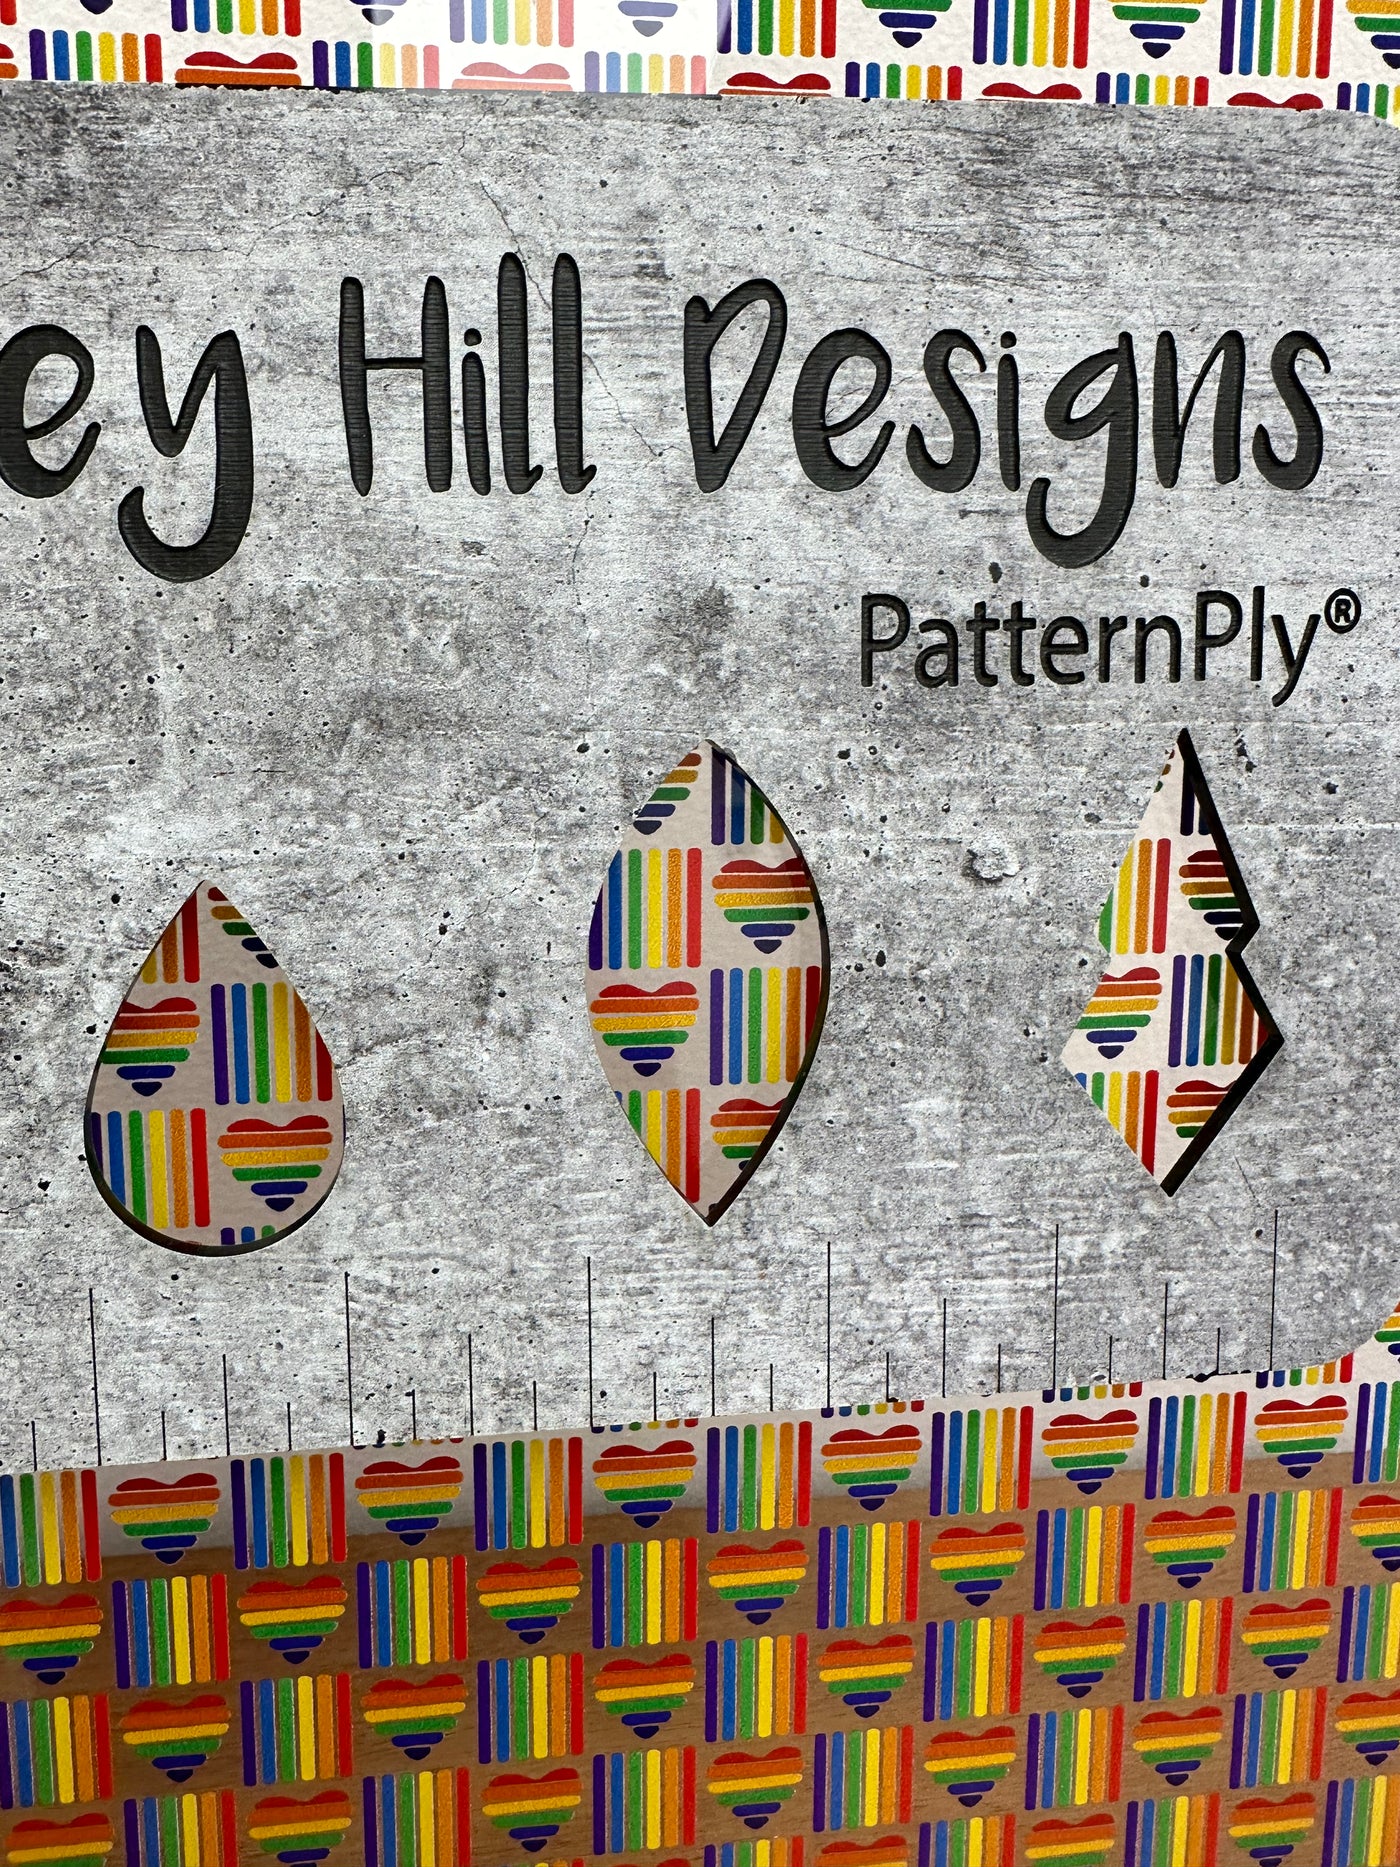 PatternPly® Scattered Rainbow Stripe Hearts and Boxes